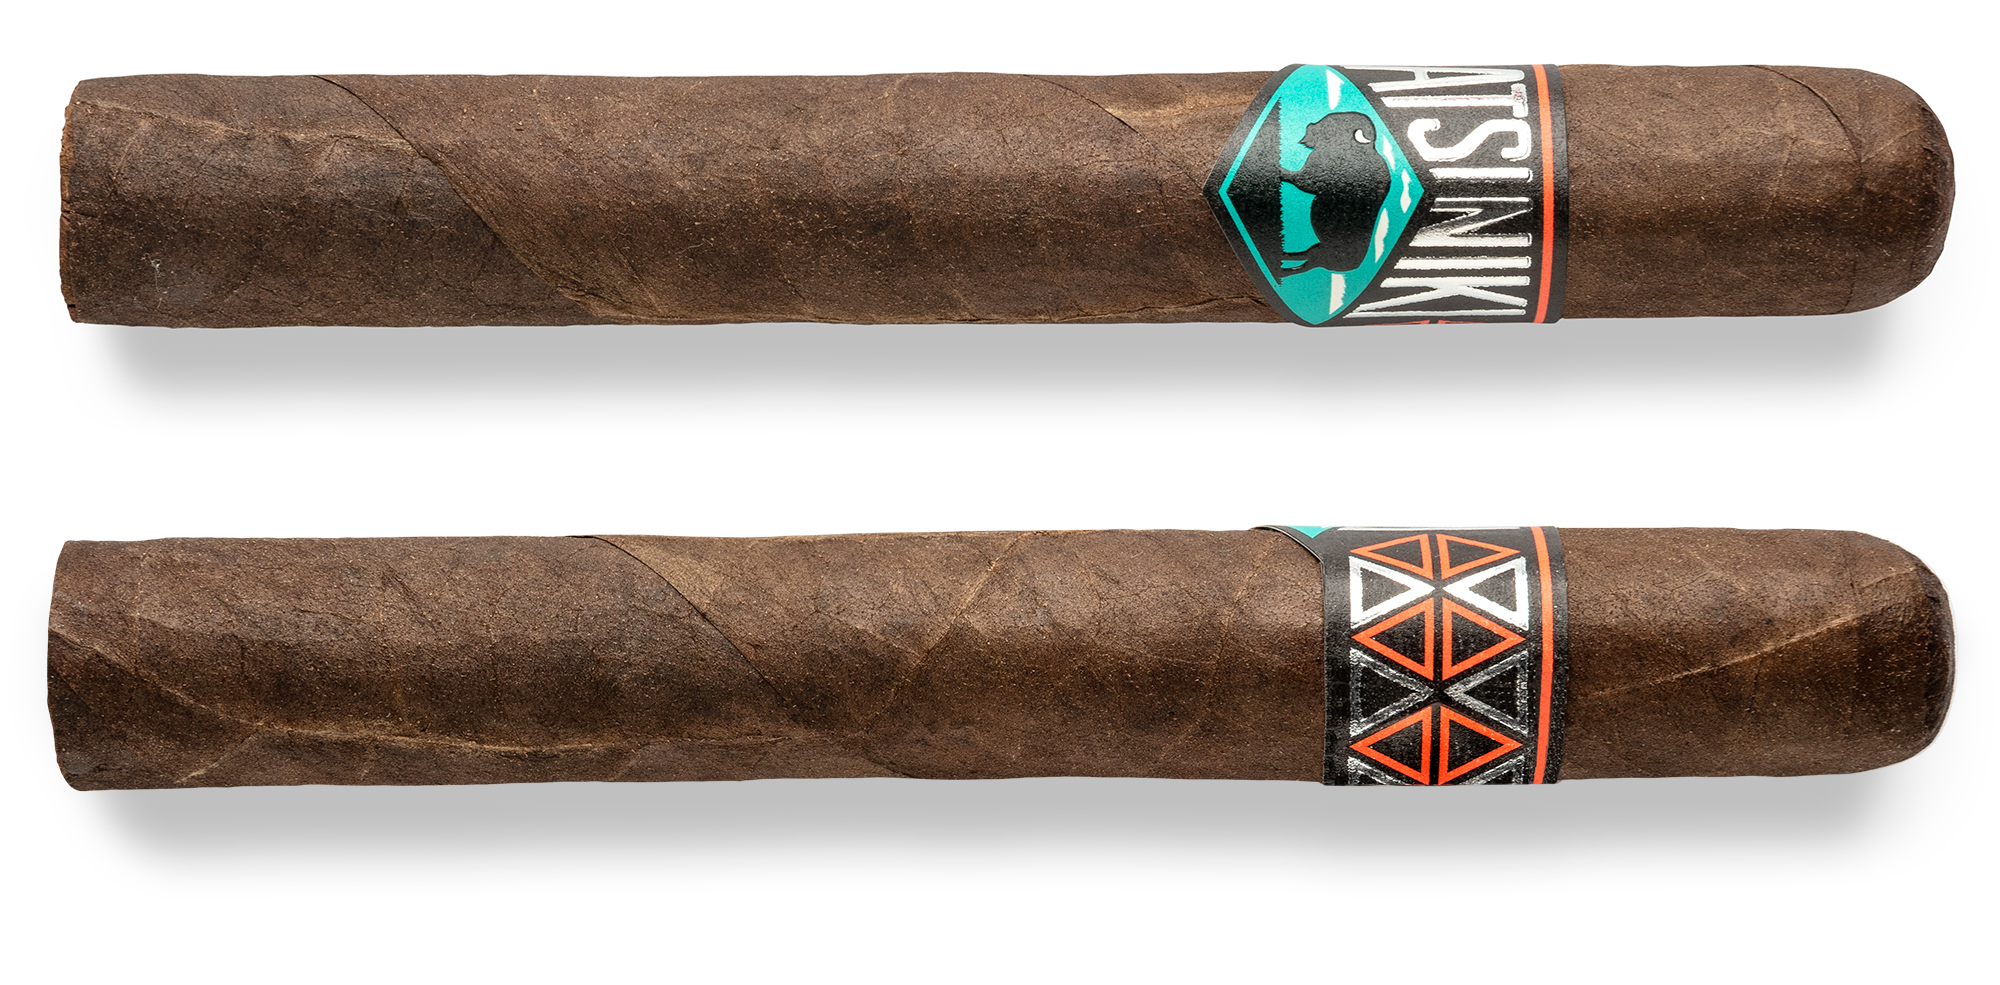 Tashka Cigar | Sweet and spicy, dried fruit, floral notes. Cool, creamy smoke with a long finish.